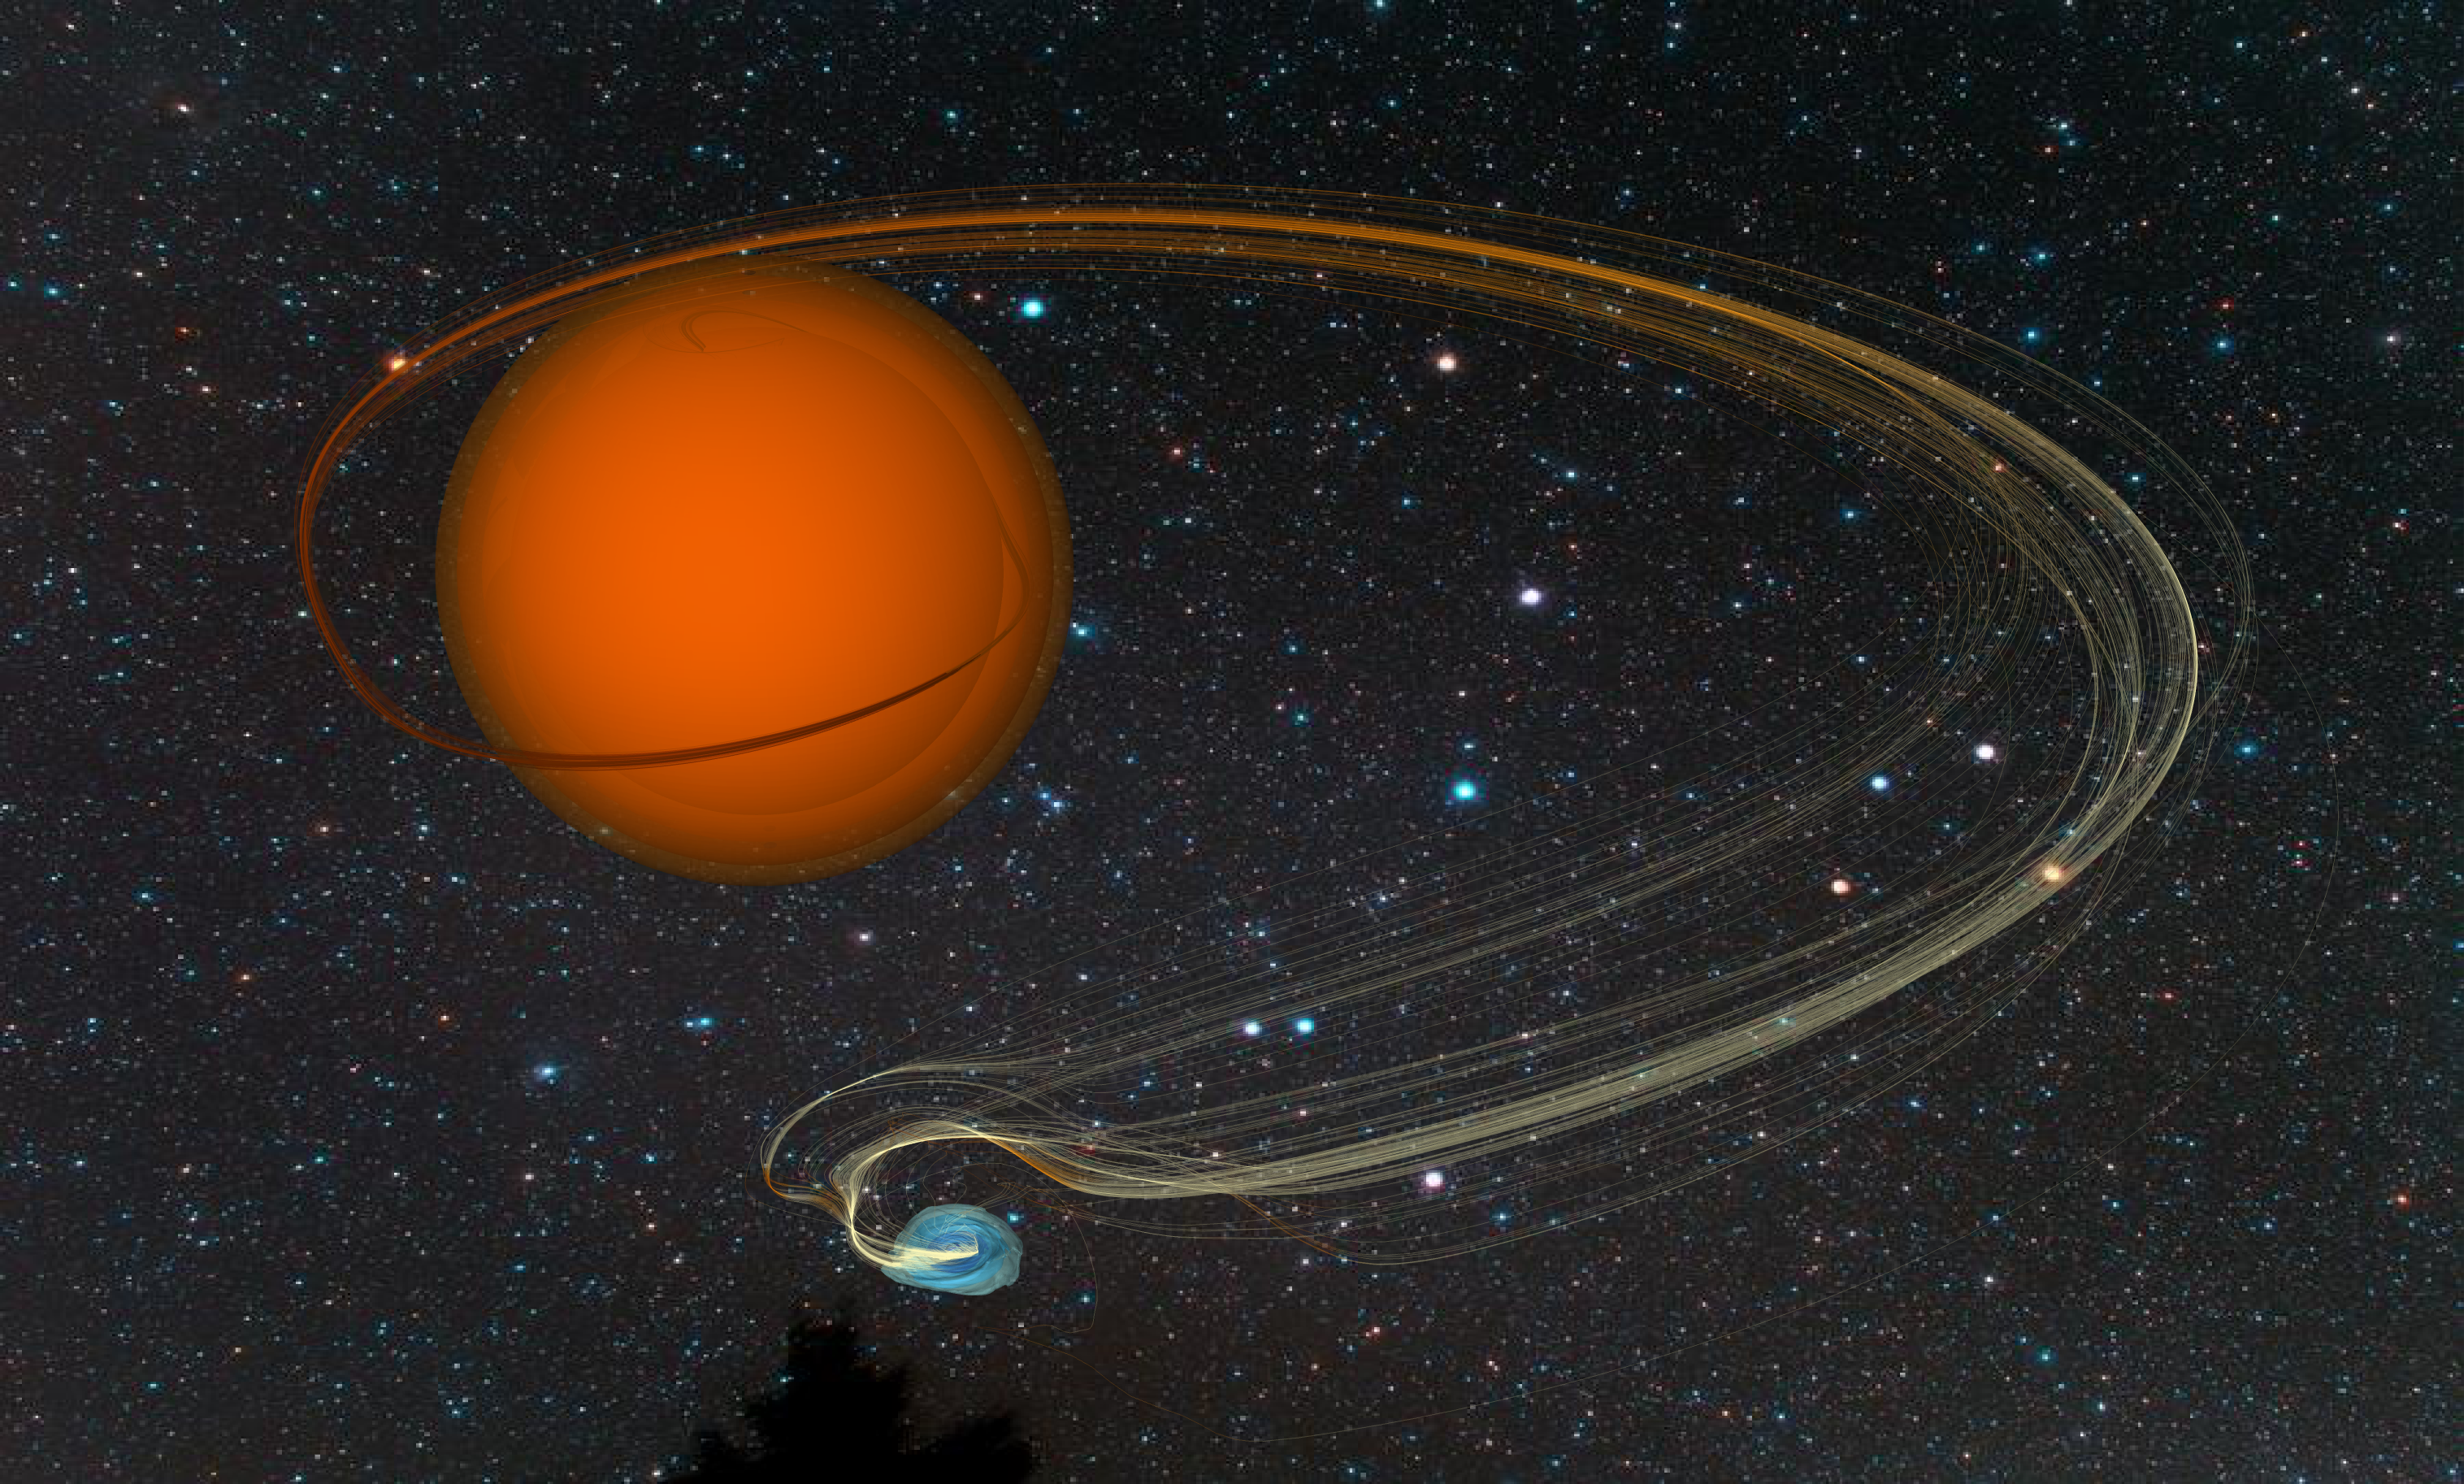 
An artistic impression based on a computer simulation of the <a href="https://www.sdss.org/press-releases/a-giant-meal-for-a-dwarf/">Draco C1 symbiotic binary star system</a> showing material flowing off the red giant star onto the white dwarf. These systems are the progenitors of some types of supernovae.
Image credit: John Blondin, North Carolina State University; See <a href="https://ui.adsabs.harvard.edu/abs/2020ApJ...900L..43L/abstract">Lewis et al. 2020</a>
